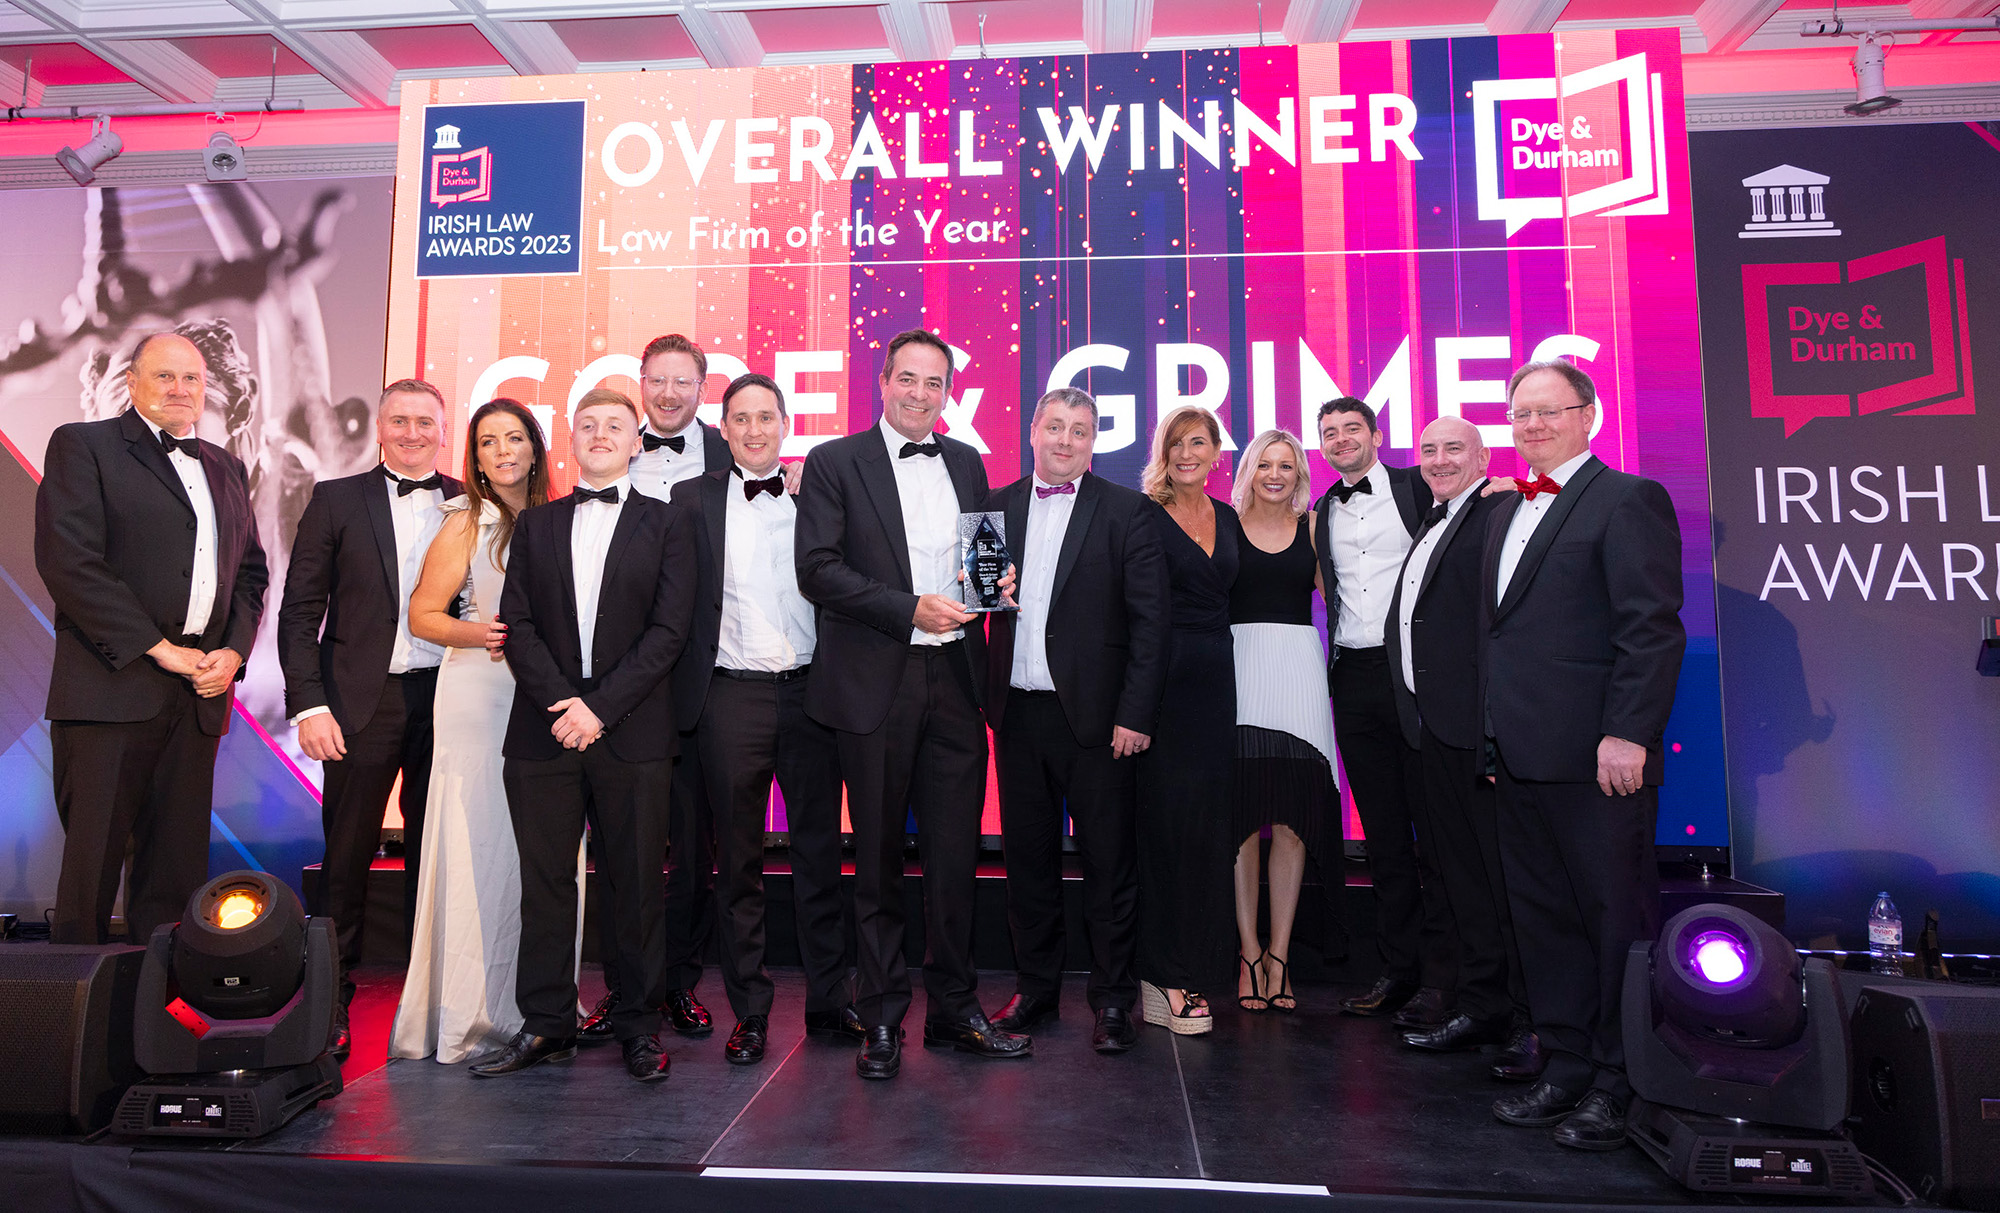 Gore & Grimes takes top prize at Irish Law Awards 2023